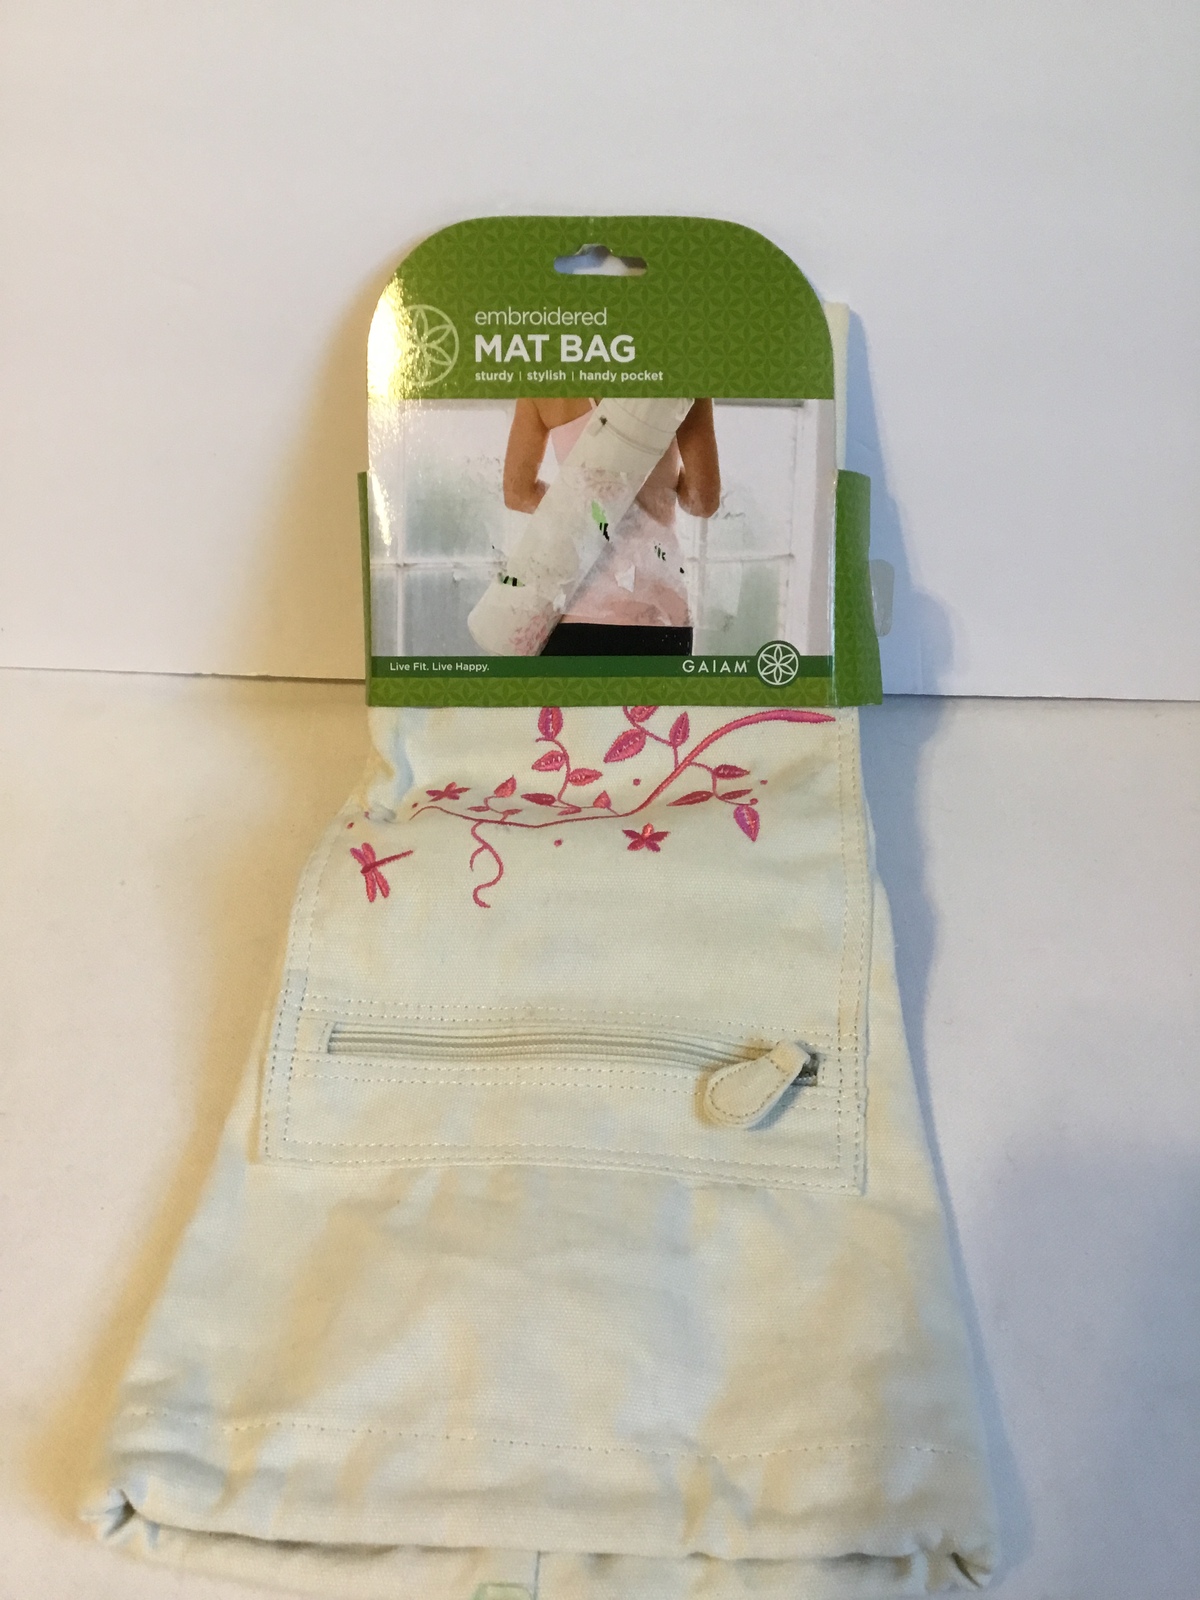 Gaiam Embroidered Yoga Mat Bag with Handy Pocket Cream White with Pink Flowers - £6.41 GBP